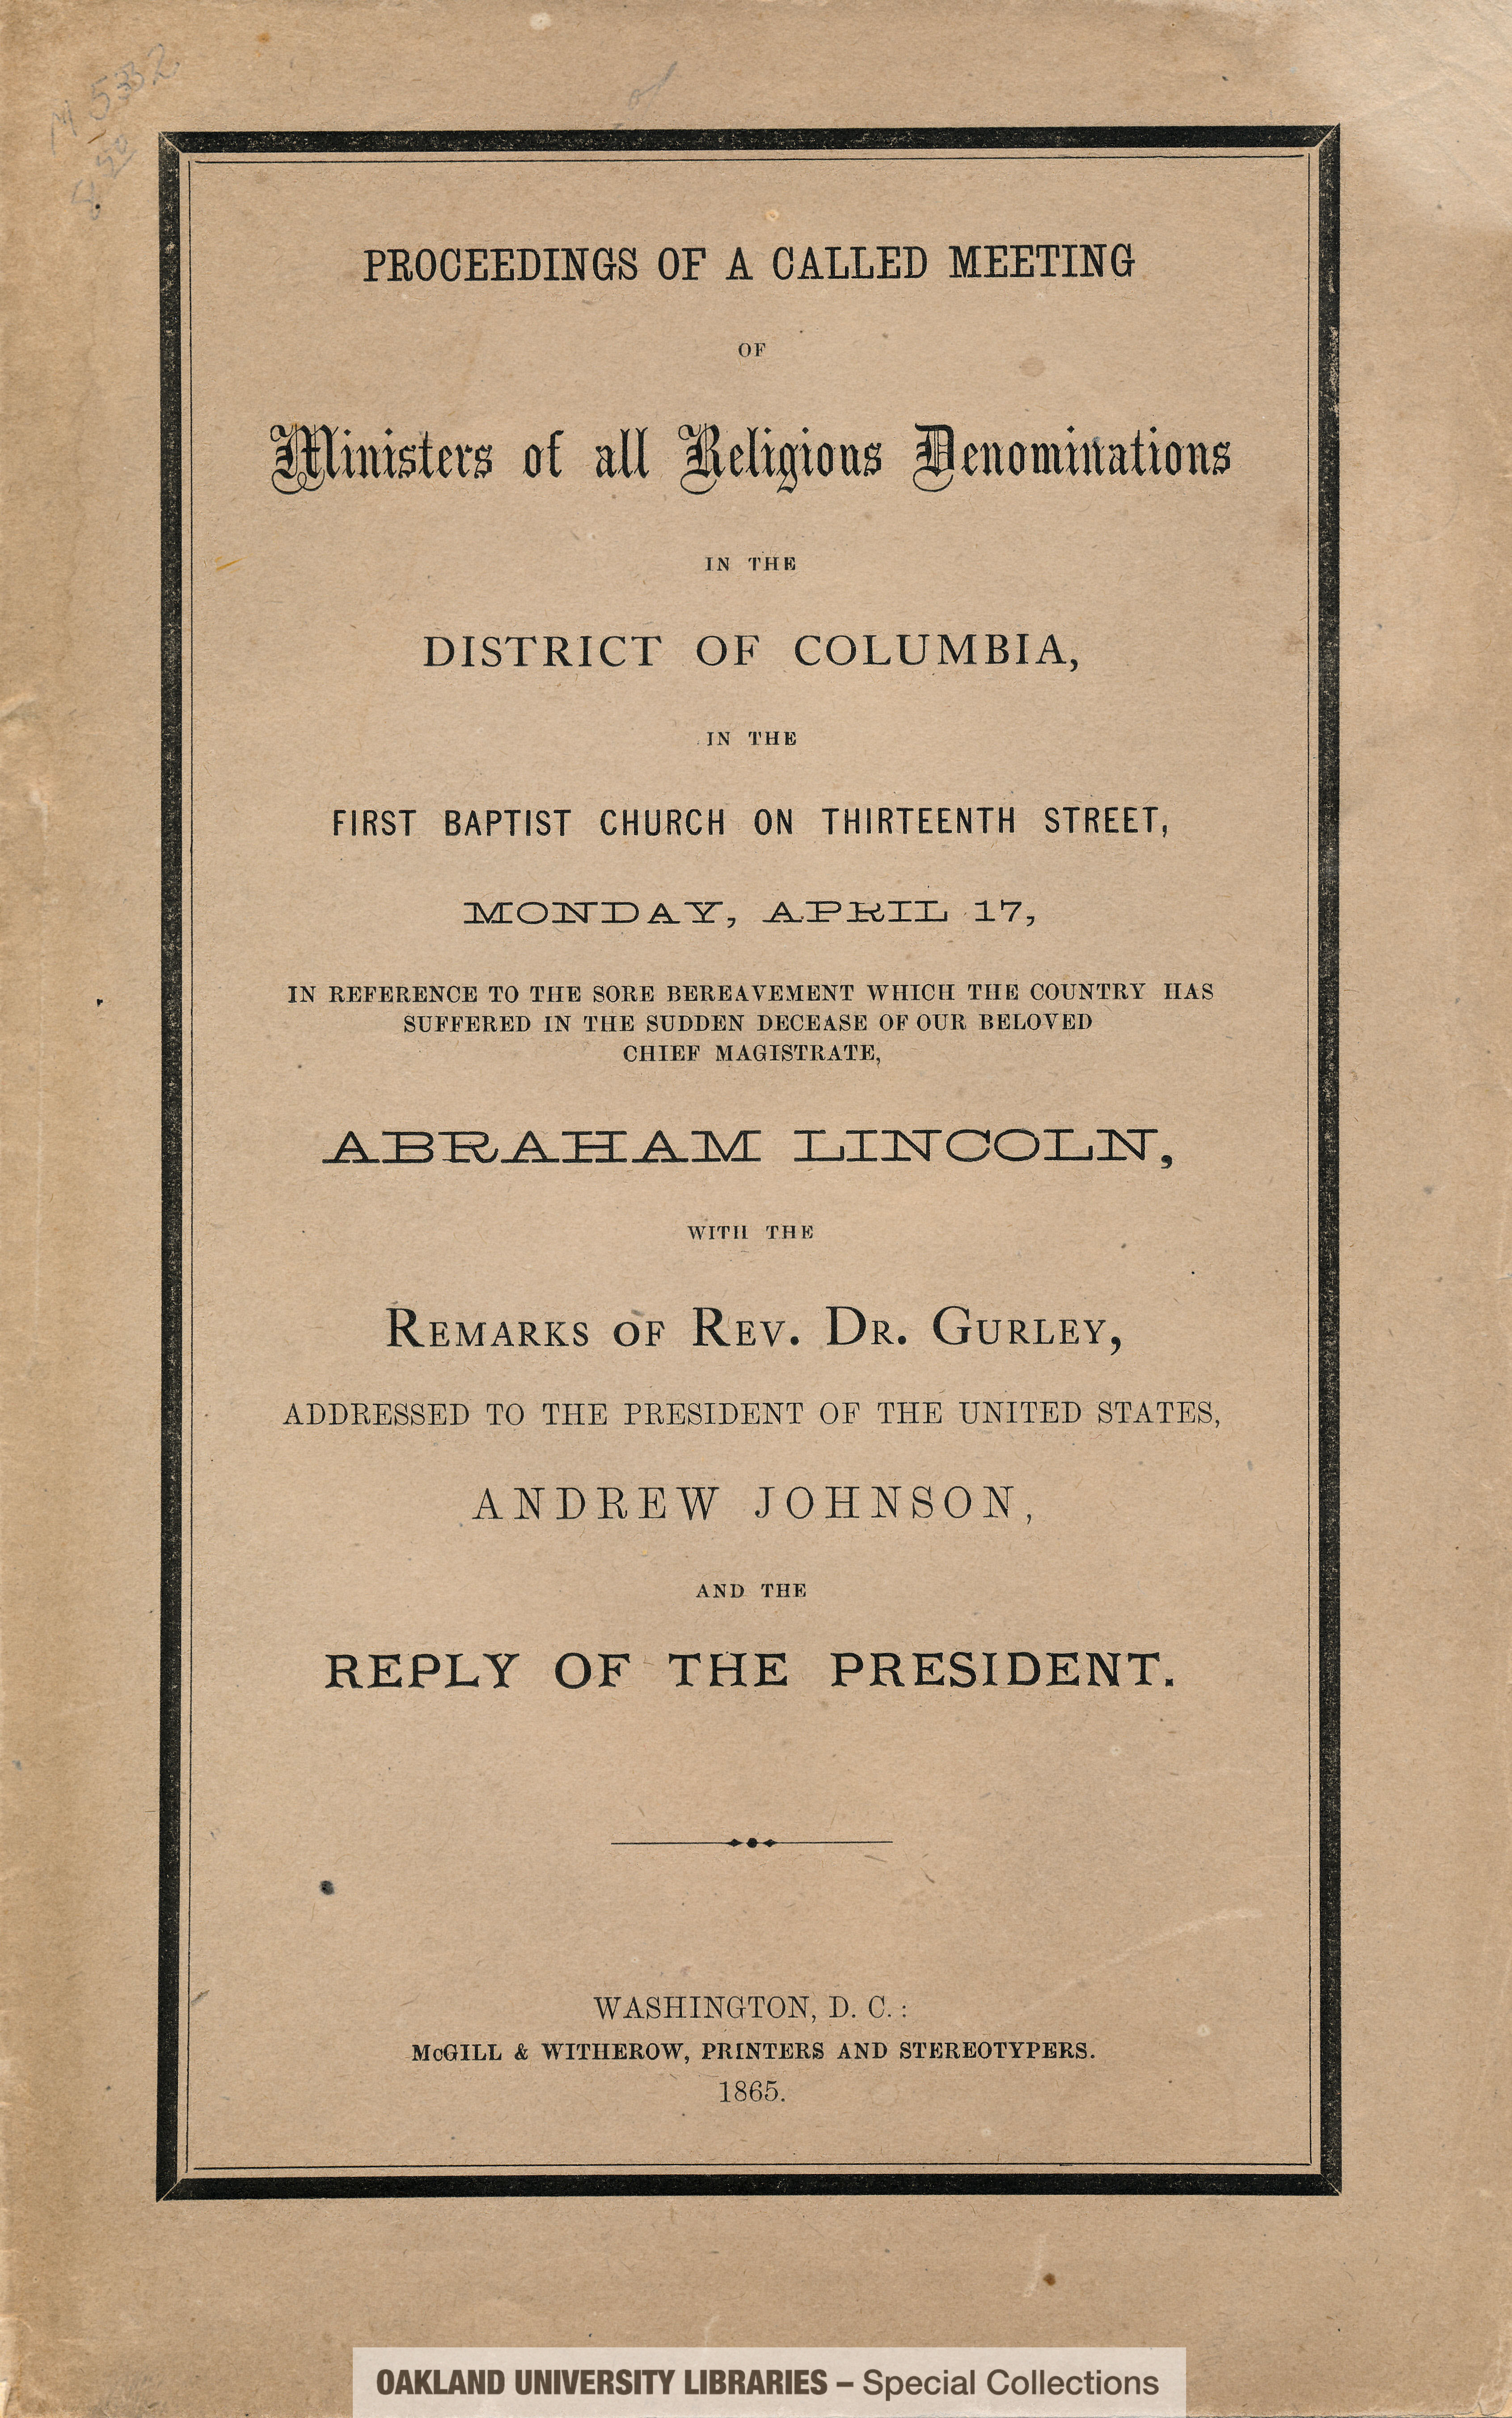 Proceedings of a called meeting of ministers of all religious denominations in the District of Columbia, in the First Baptist Church on Thirteenth Street, Monday, April 17